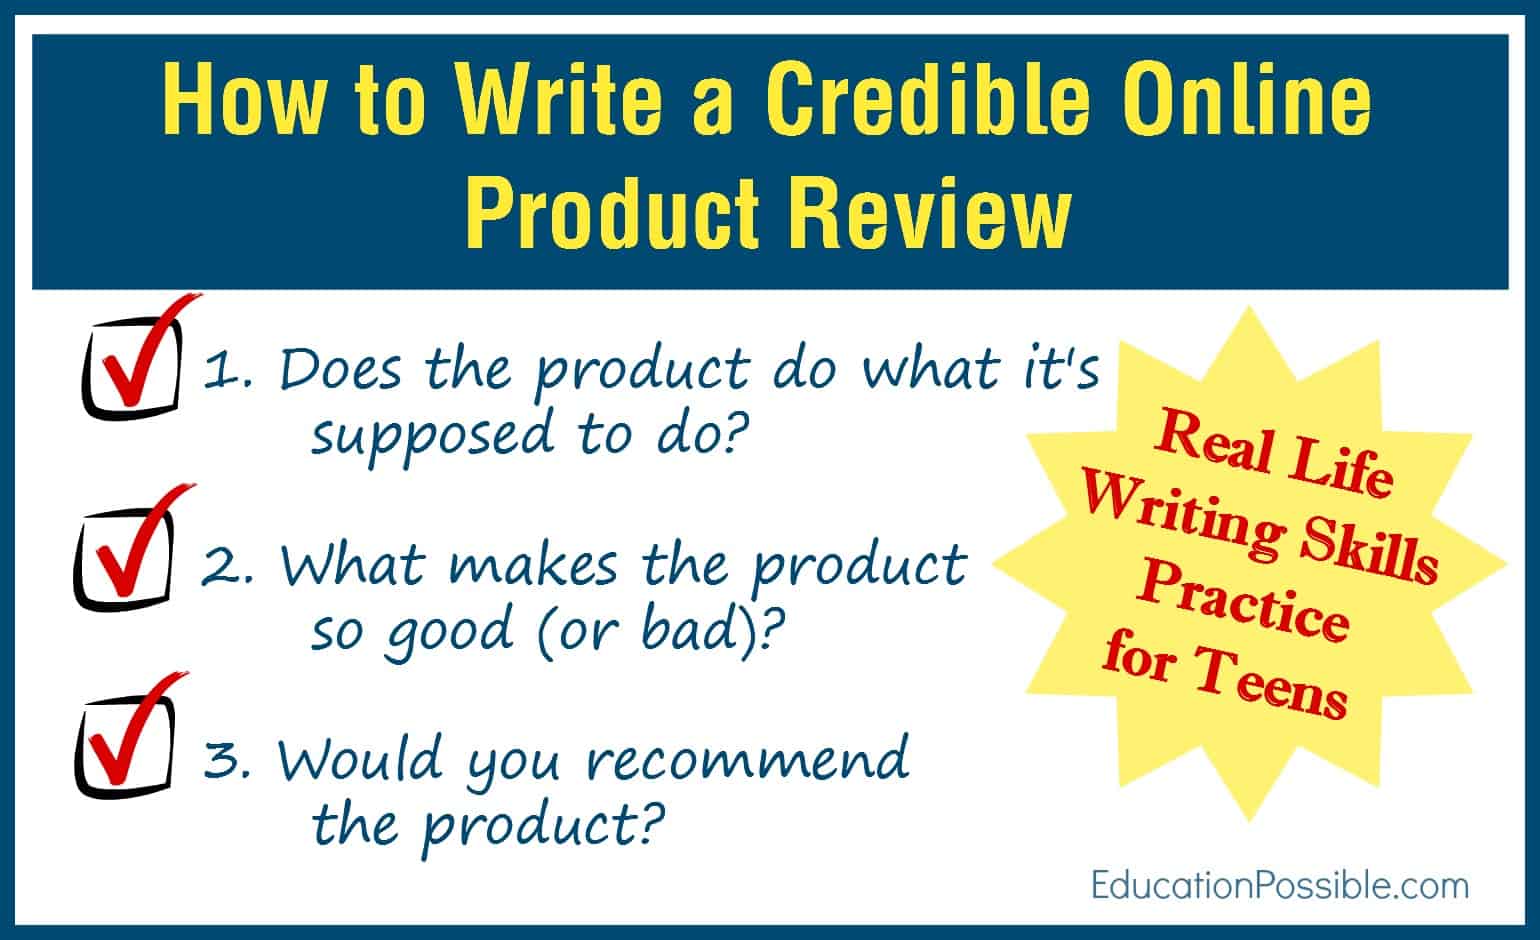 List of items you need to write a credible product review.